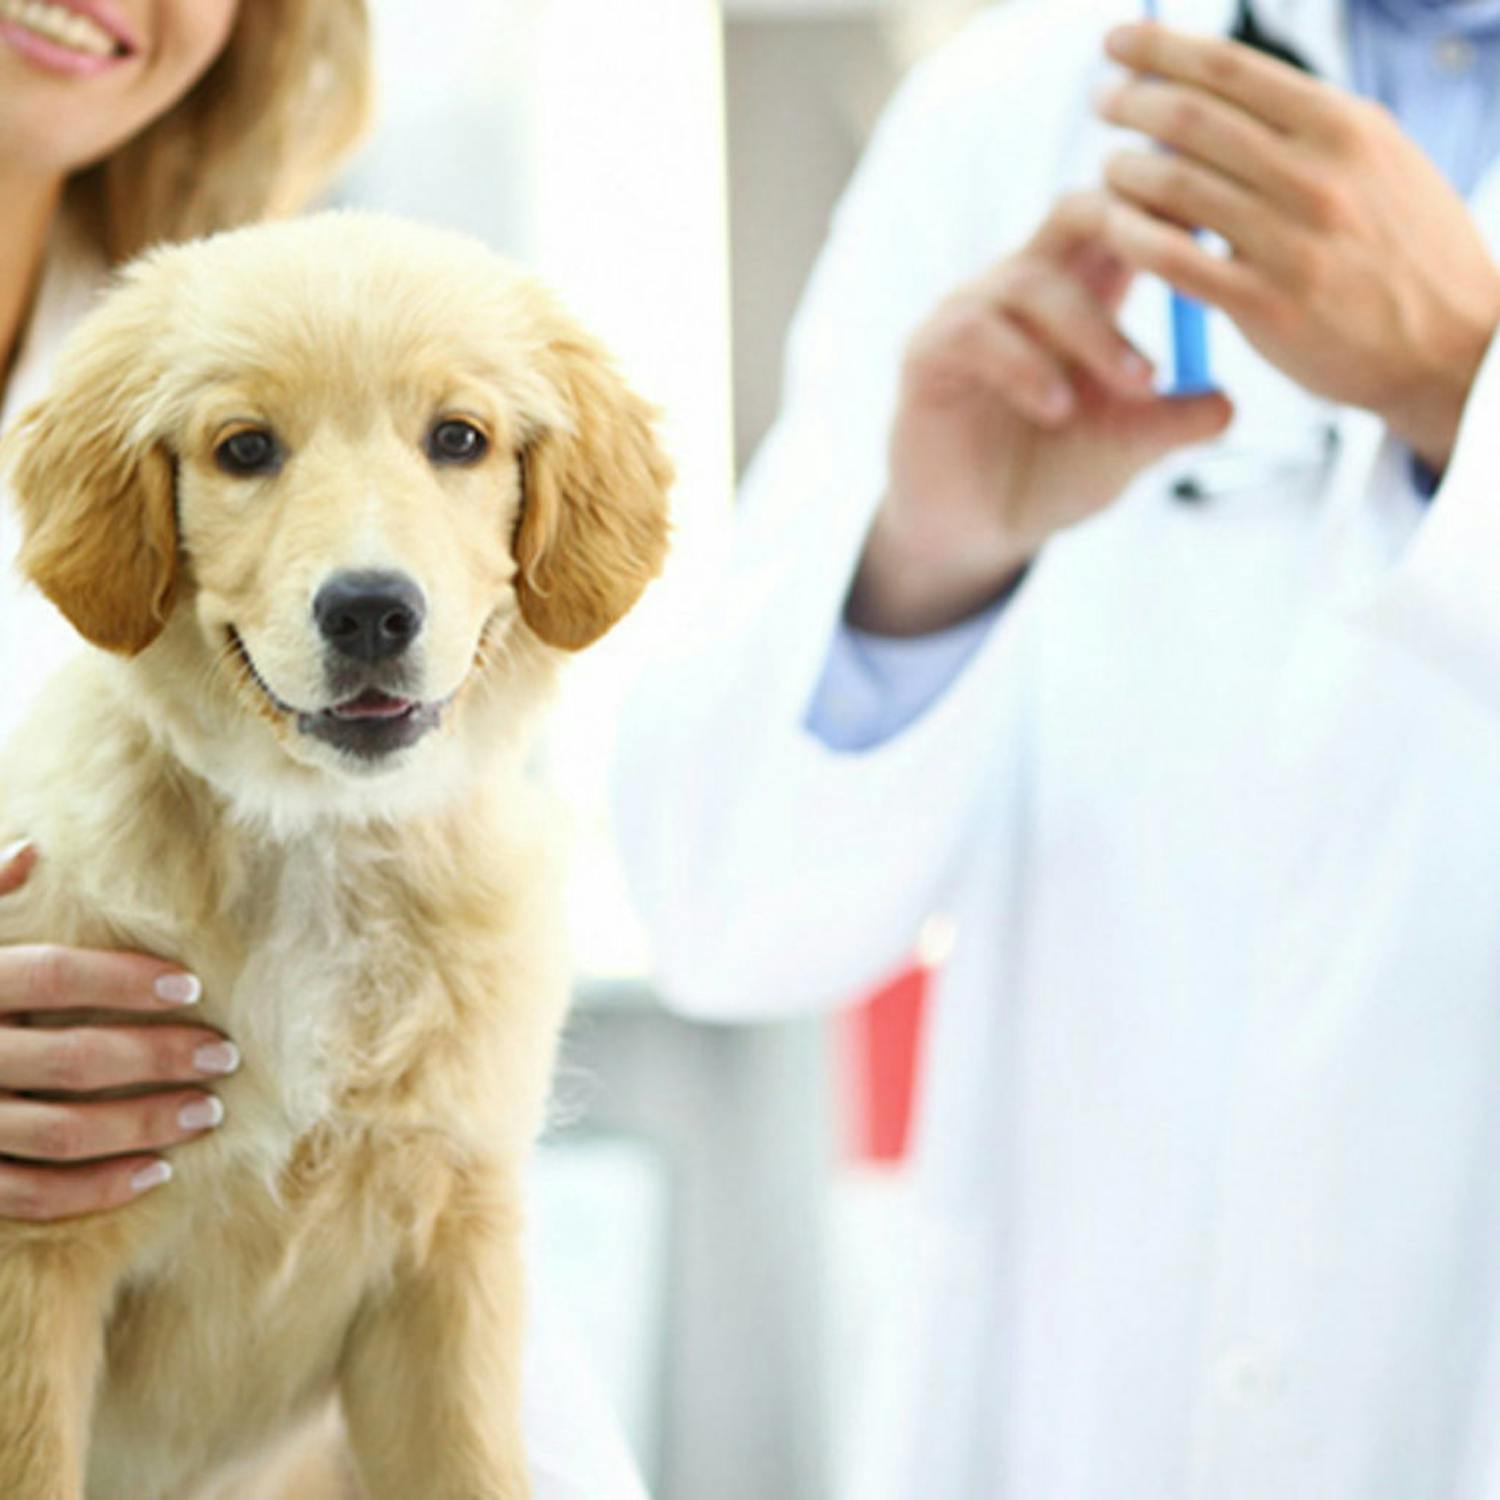 How anti-vaxxers are affecting pets